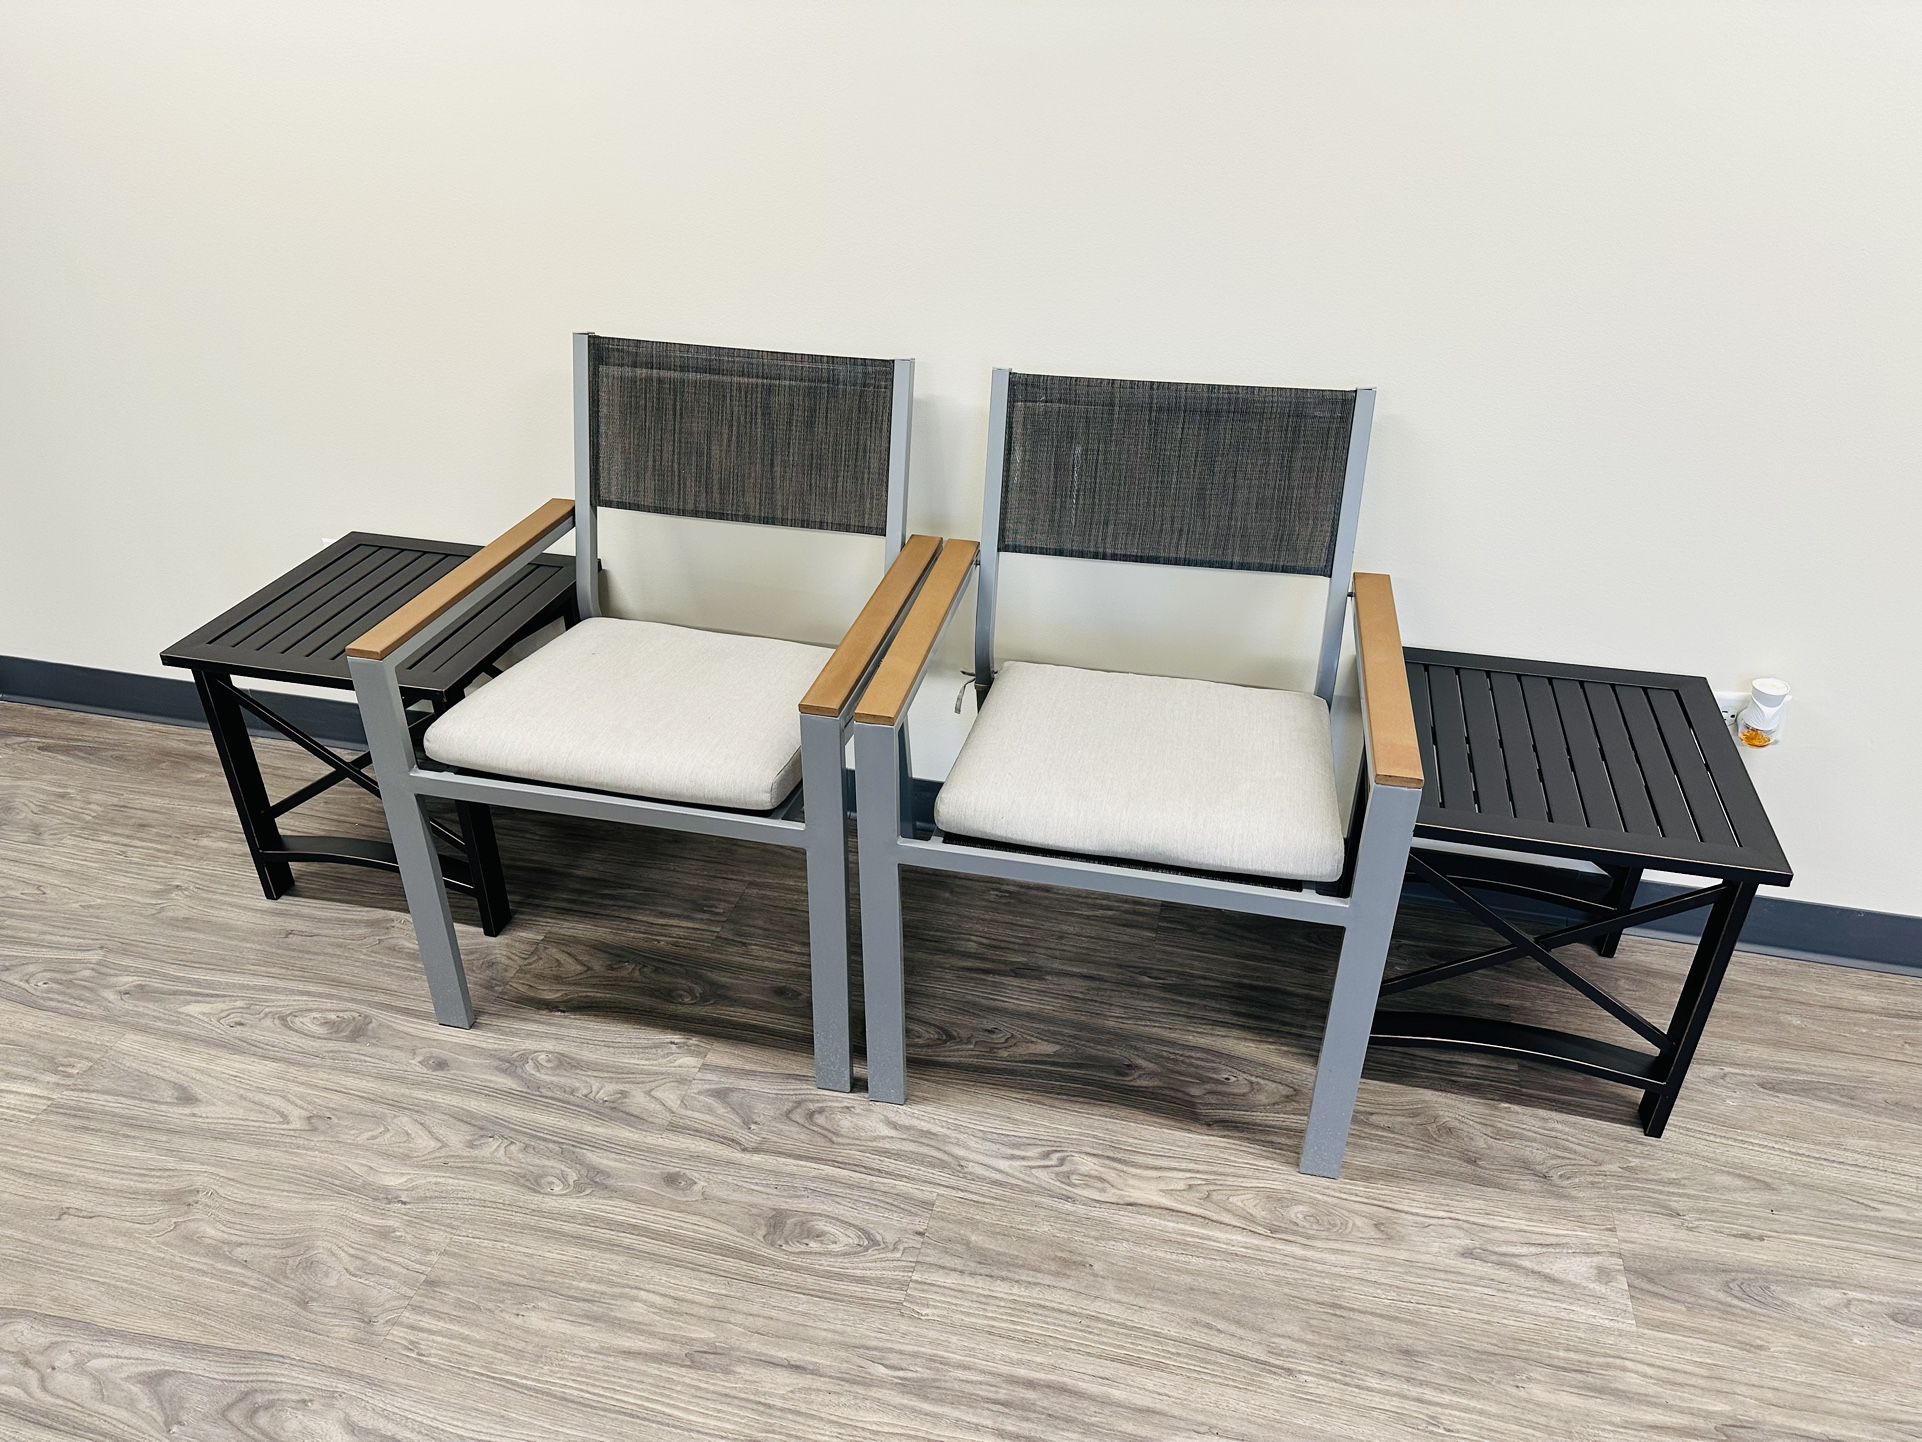 Patio Chairs - Metal End Tables - Patio Furniture 